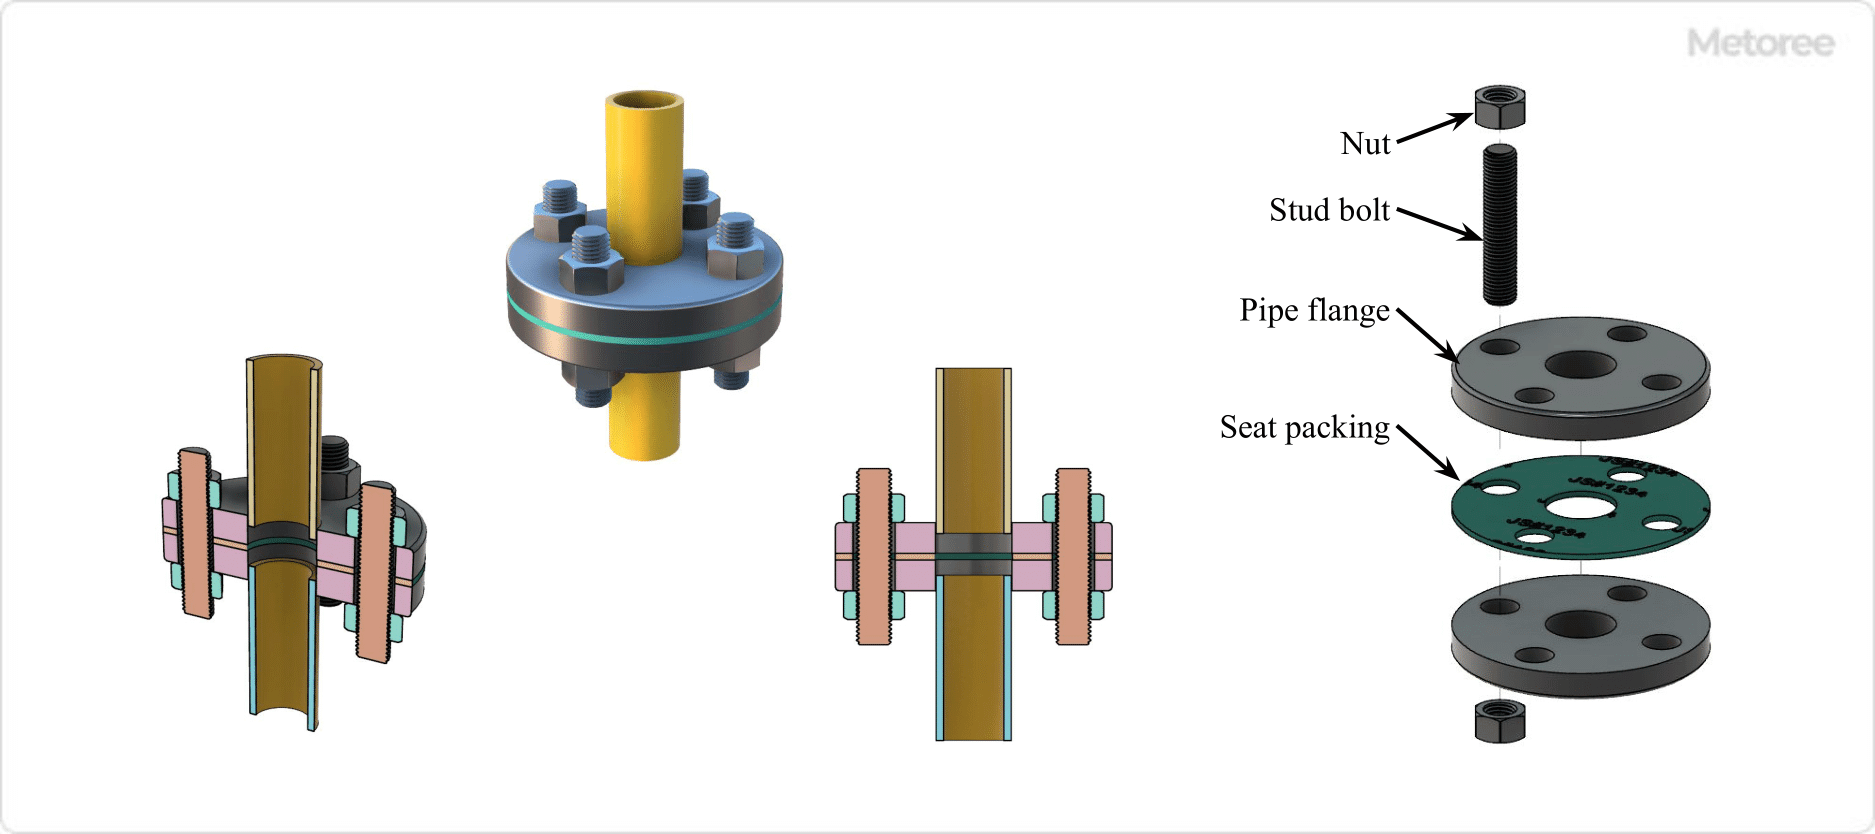 Figure 1. Sheet packing for pipe flange